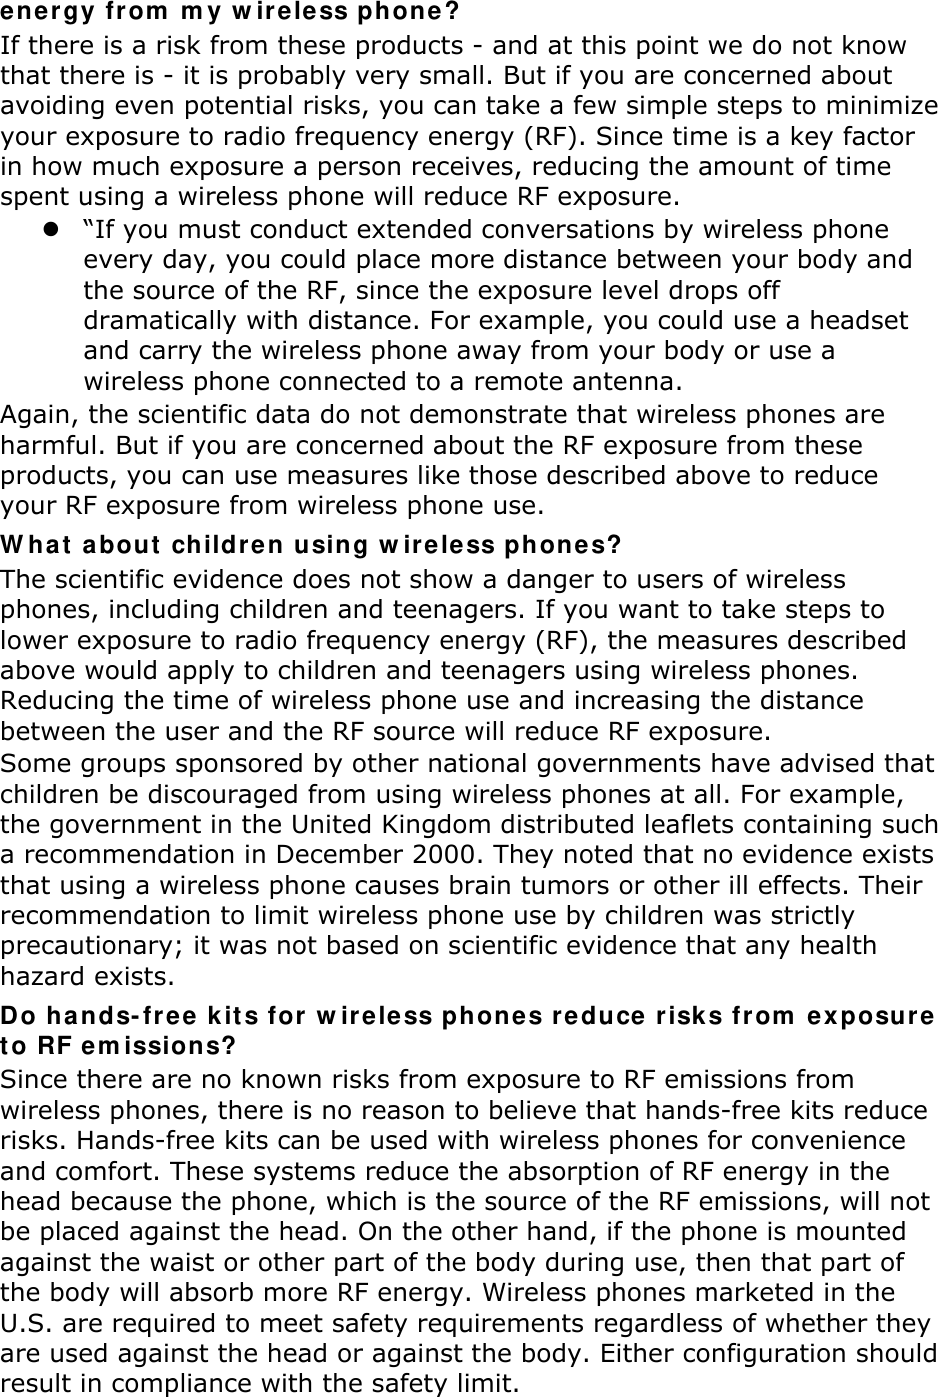 energy from my wireless phone? If there is a risk from these products - and at this point we do not know that there is - it is probably very small. But if you are concerned about avoiding even potential risks, you can take a few simple steps to minimize your exposure to radio frequency energy (RF). Since time is a key factor in how much exposure a person receives, reducing the amount of time spent using a wireless phone will reduce RF exposure.  “If you must conduct extended conversations by wireless phone every day, you could place more distance between your body and the source of the RF, since the exposure level drops off dramatically with distance. For example, you could use a headset and carry the wireless phone away from your body or use a wireless phone connected to a remote antenna. Again, the scientific data do not demonstrate that wireless phones are harmful. But if you are concerned about the RF exposure from these products, you can use measures like those described above to reduce your RF exposure from wireless phone use. What about children using wireless phones? The scientific evidence does not show a danger to users of wireless phones, including children and teenagers. If you want to take steps to lower exposure to radio frequency energy (RF), the measures described above would apply to children and teenagers using wireless phones. Reducing the time of wireless phone use and increasing the distance between the user and the RF source will reduce RF exposure. Some groups sponsored by other national governments have advised that children be discouraged from using wireless phones at all. For example, the government in the United Kingdom distributed leaflets containing such a recommendation in December 2000. They noted that no evidence exists that using a wireless phone causes brain tumors or other ill effects. Their recommendation to limit wireless phone use by children was strictly precautionary; it was not based on scientific evidence that any health hazard exists.   Do hands-free kits for wireless phones reduce risks from exposure to RF emissions? Since there are no known risks from exposure to RF emissions from wireless phones, there is no reason to believe that hands-free kits reduce risks. Hands-free kits can be used with wireless phones for convenience and comfort. These systems reduce the absorption of RF energy in the head because the phone, which is the source of the RF emissions, will not be placed against the head. On the other hand, if the phone is mounted against the waist or other part of the body during use, then that part of the body will absorb more RF energy. Wireless phones marketed in the U.S. are required to meet safety requirements regardless of whether they are used against the head or against the body. Either configuration should result in compliance with the safety limit. 